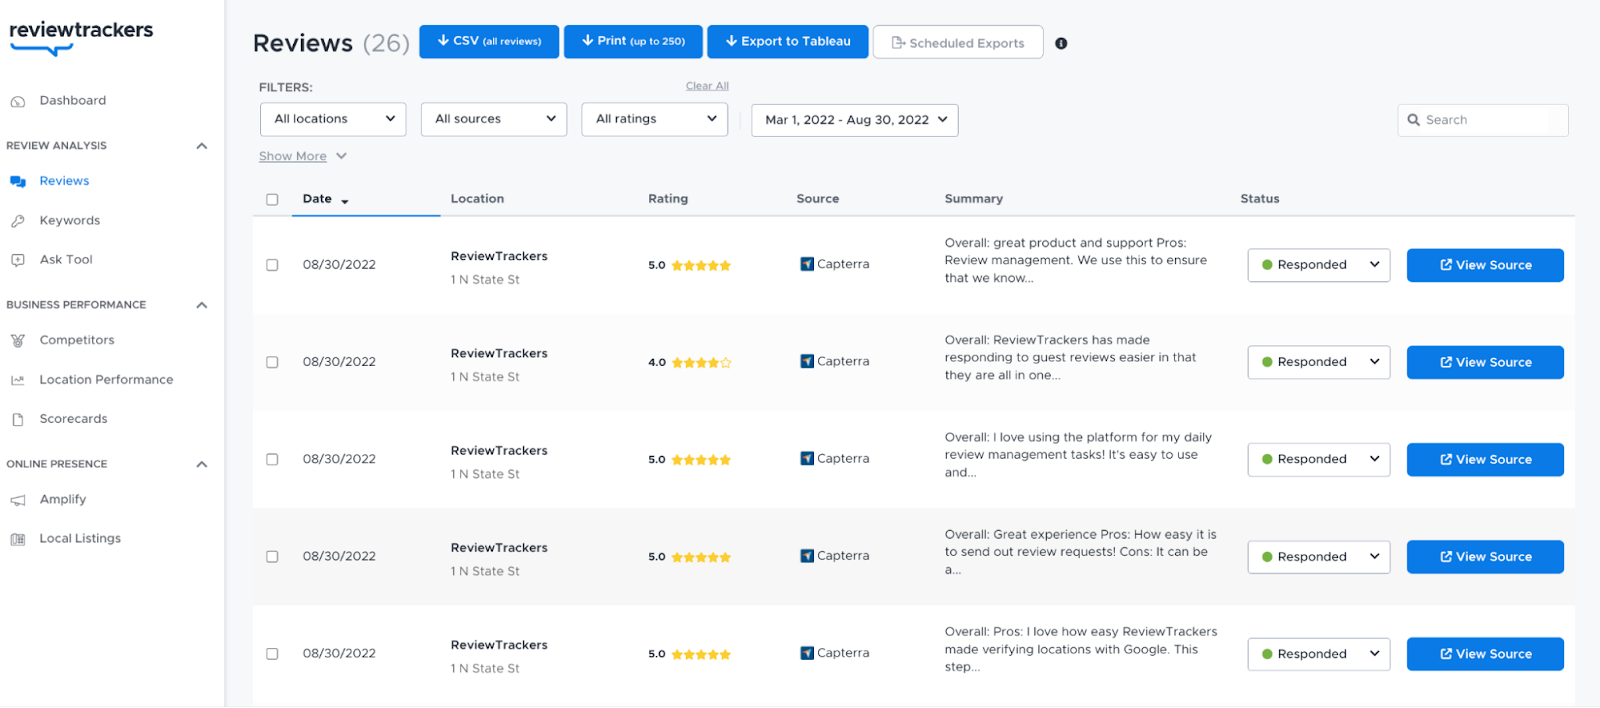 "Reviews" table in ReviewTrackers